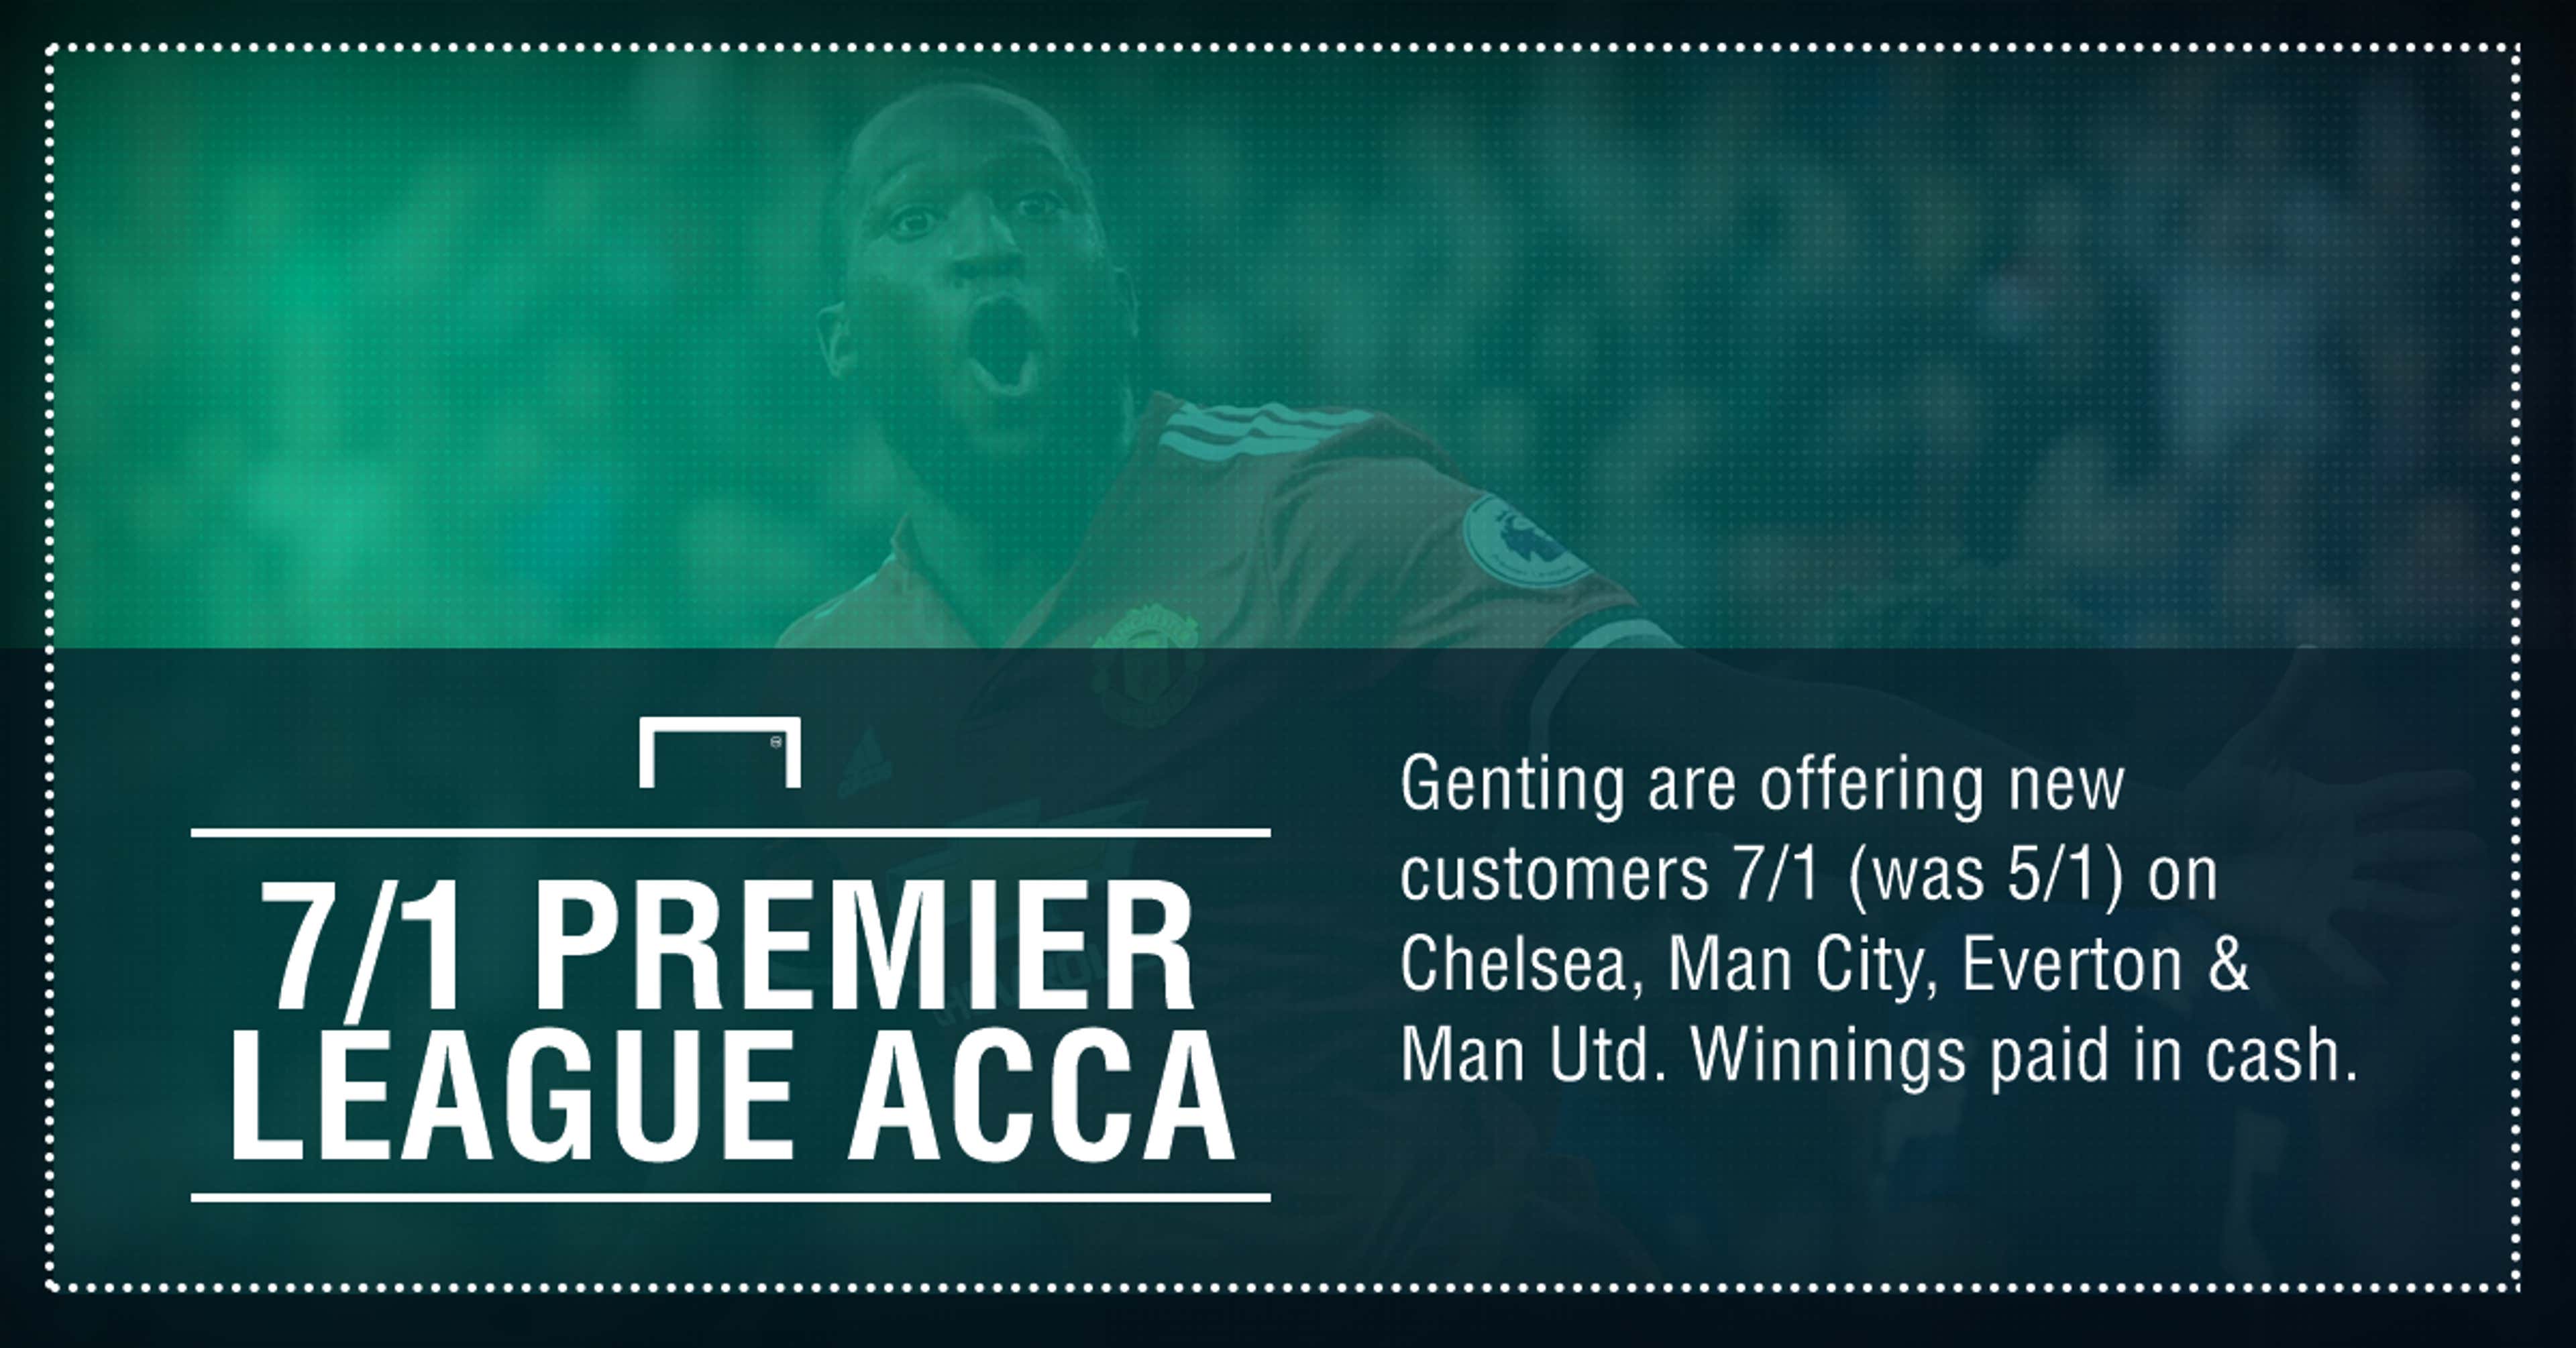 GFX FACT GENTING PL ACCA 220917